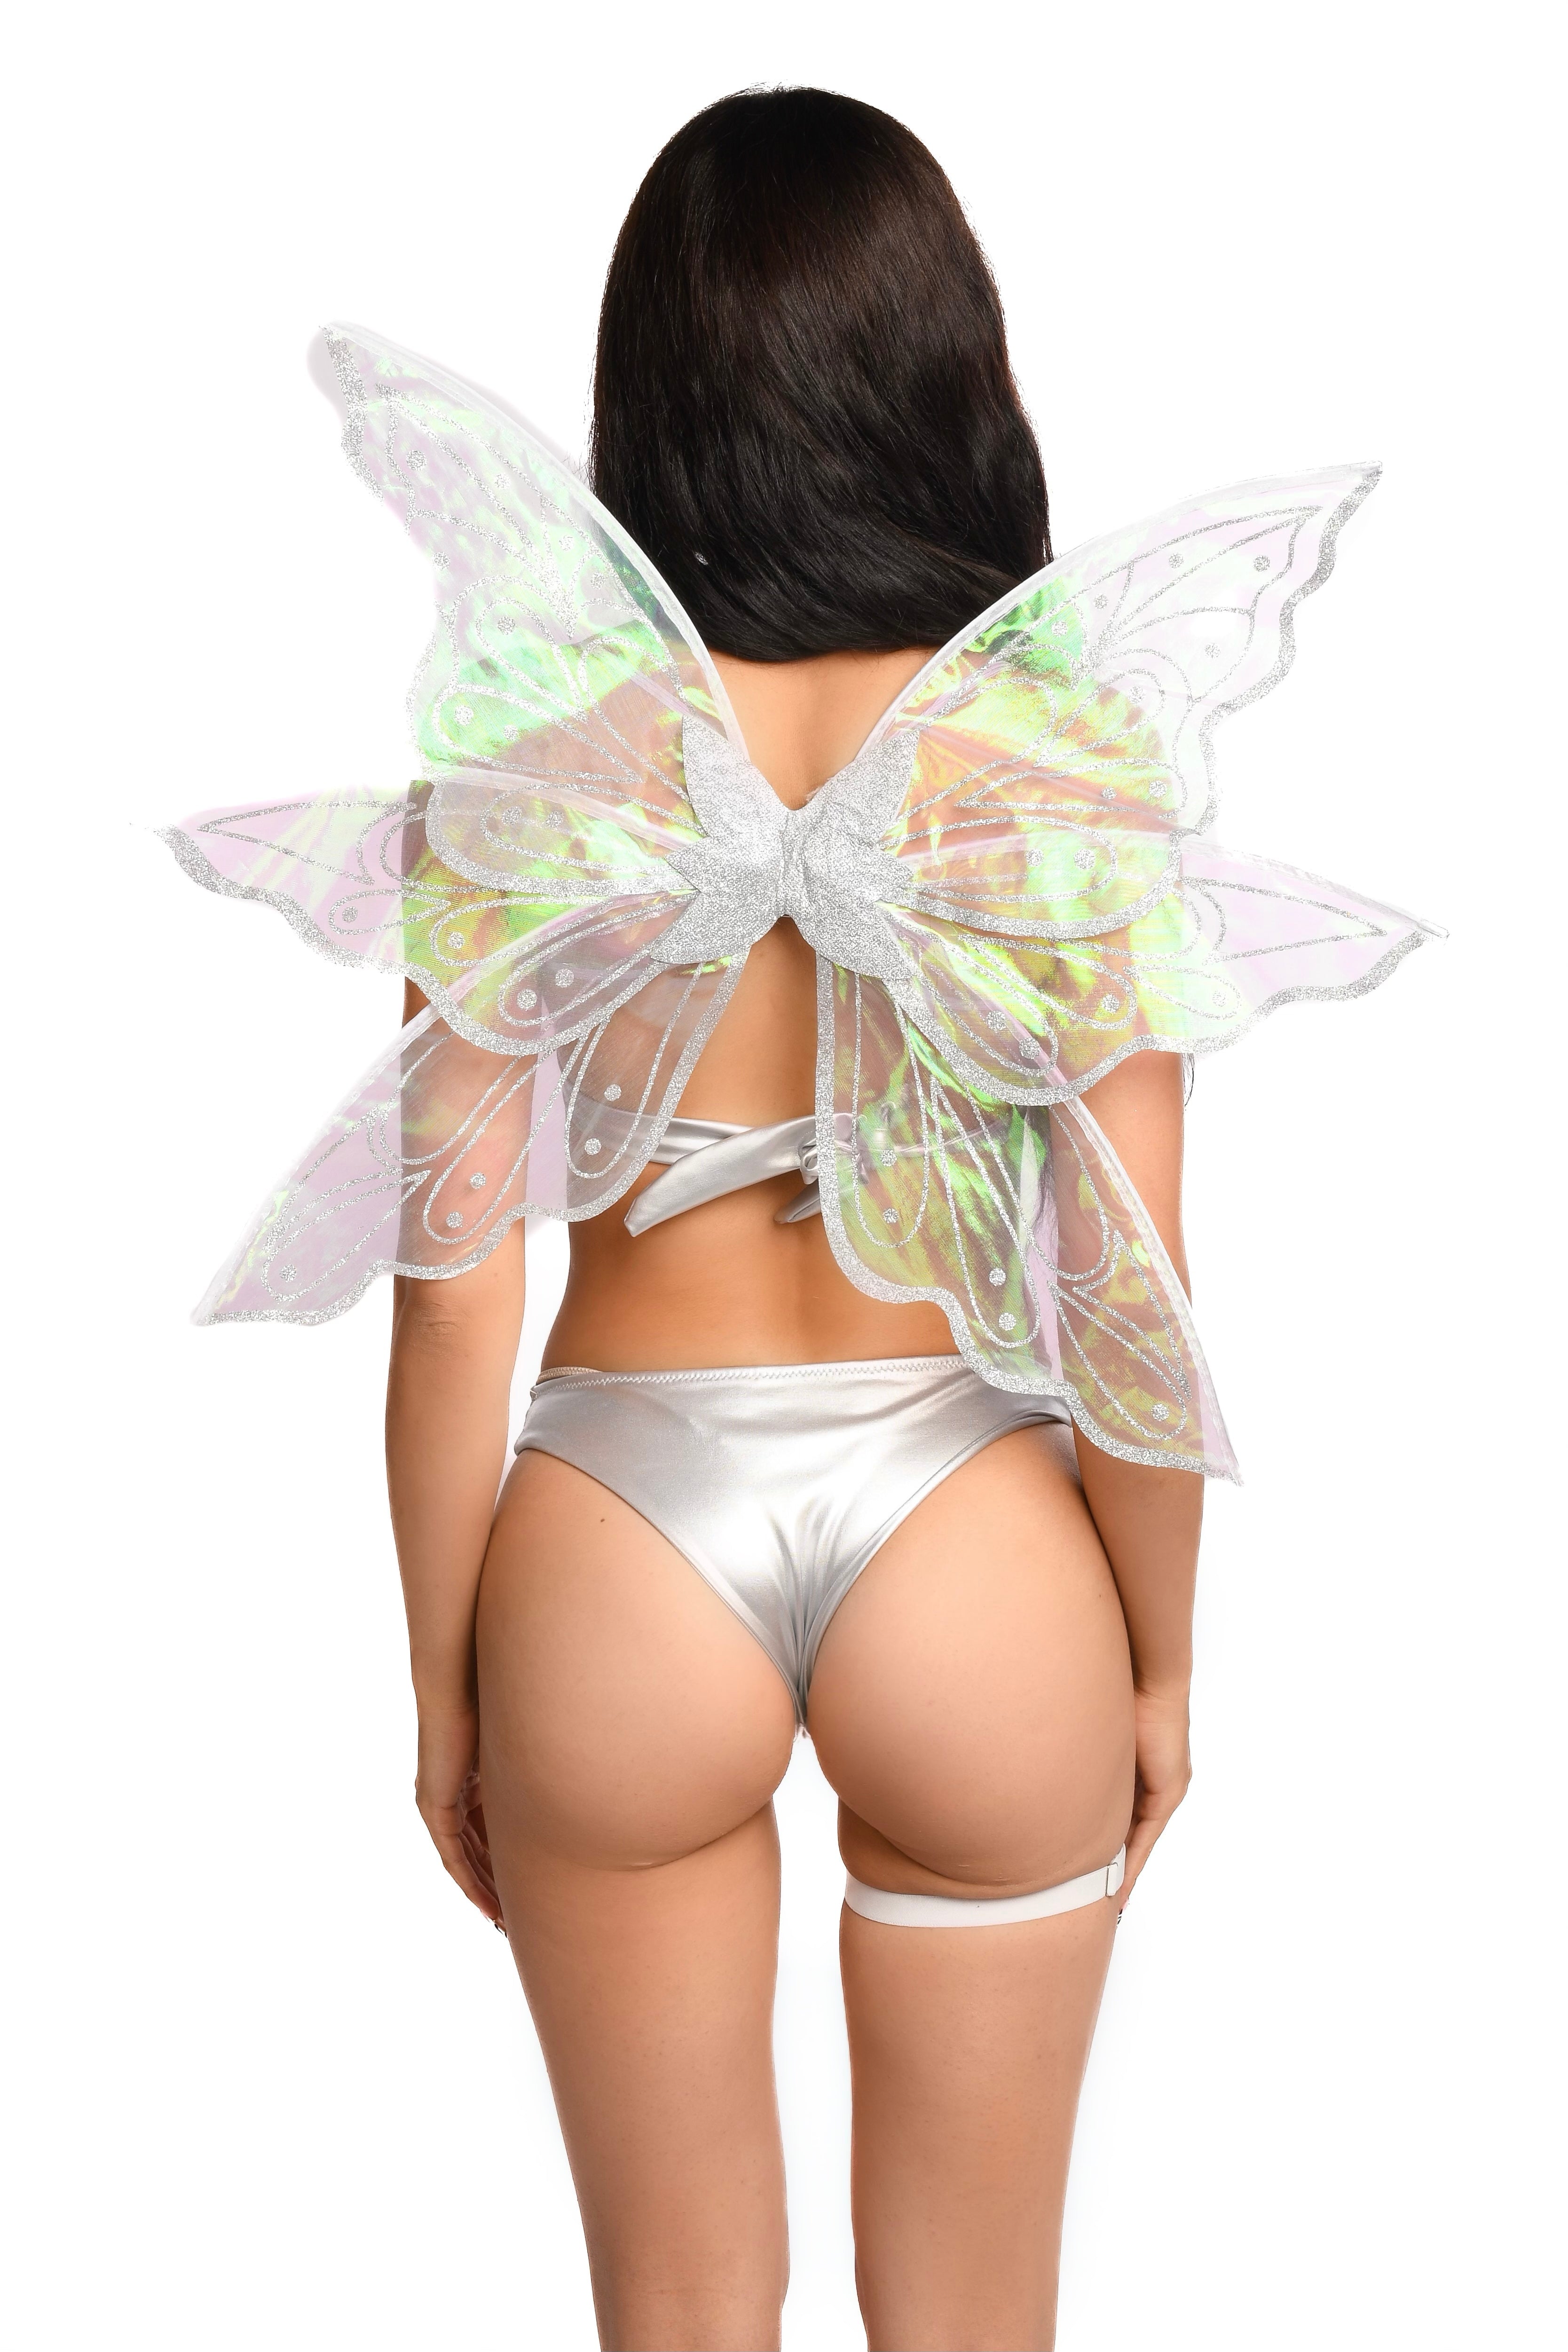 Adult Fairy Costume, Pre Made Ready to Ship, Fairy Rave Outfit